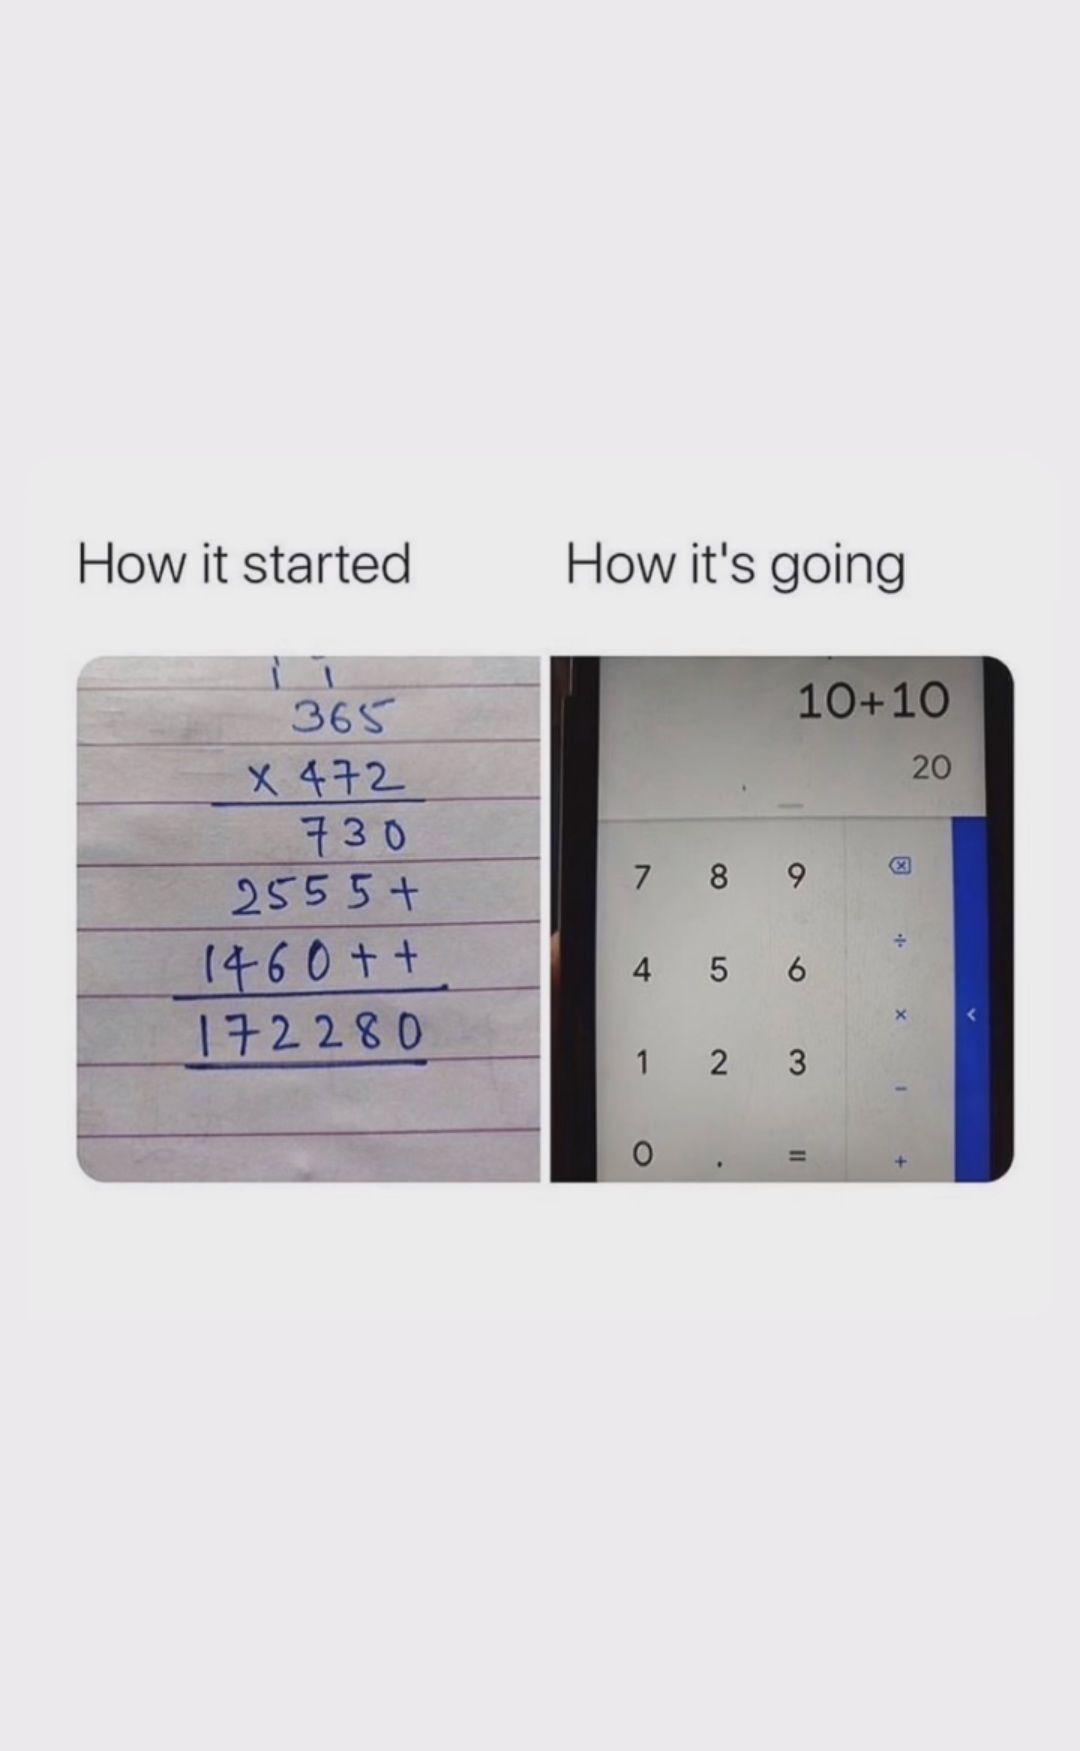 How it started
365
X 472
730
2555 +
1460++
172280
How it's going
10+10
789
4 5 6
1 2 3
11
+
20